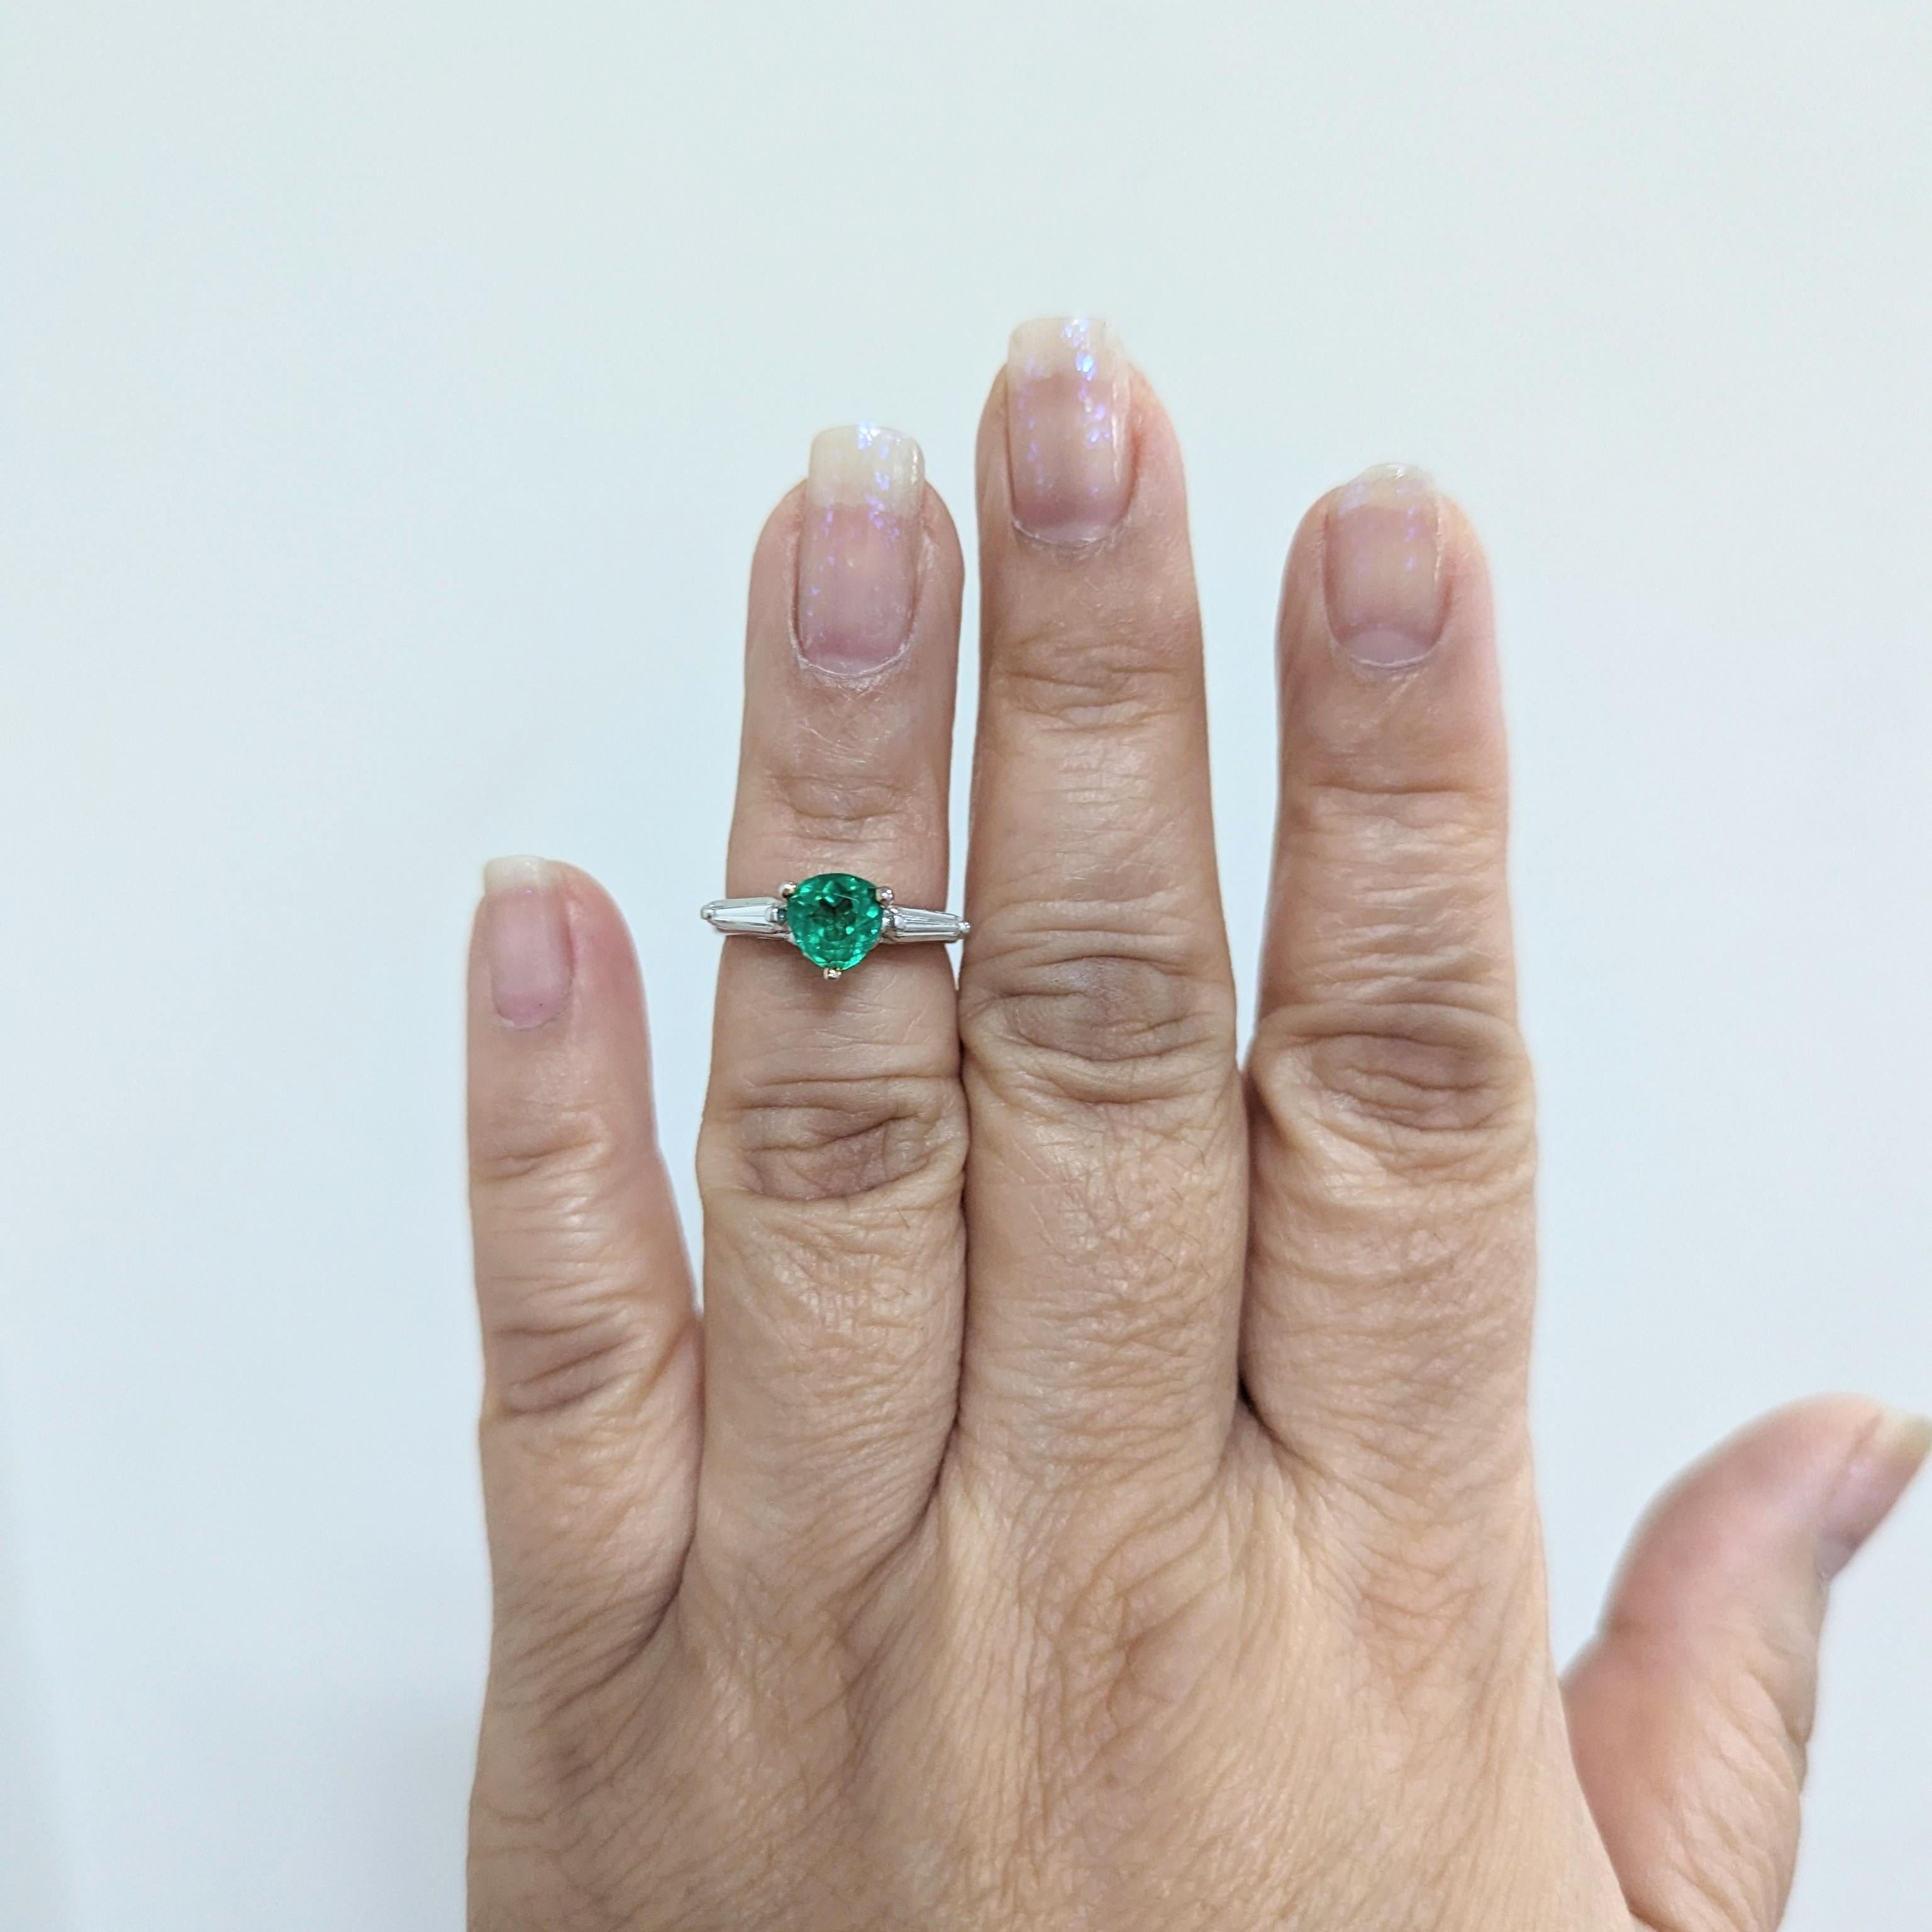 Beautiful ring that can be worn in two different ways.  Emerald pear shape that weighs 1.01 ct. with 0.50 ct. good quality white diamond rounds and baguettes.  Handmade in 14k white gold and platinum.  Ring size 5.25.  Ring can be worn with just the